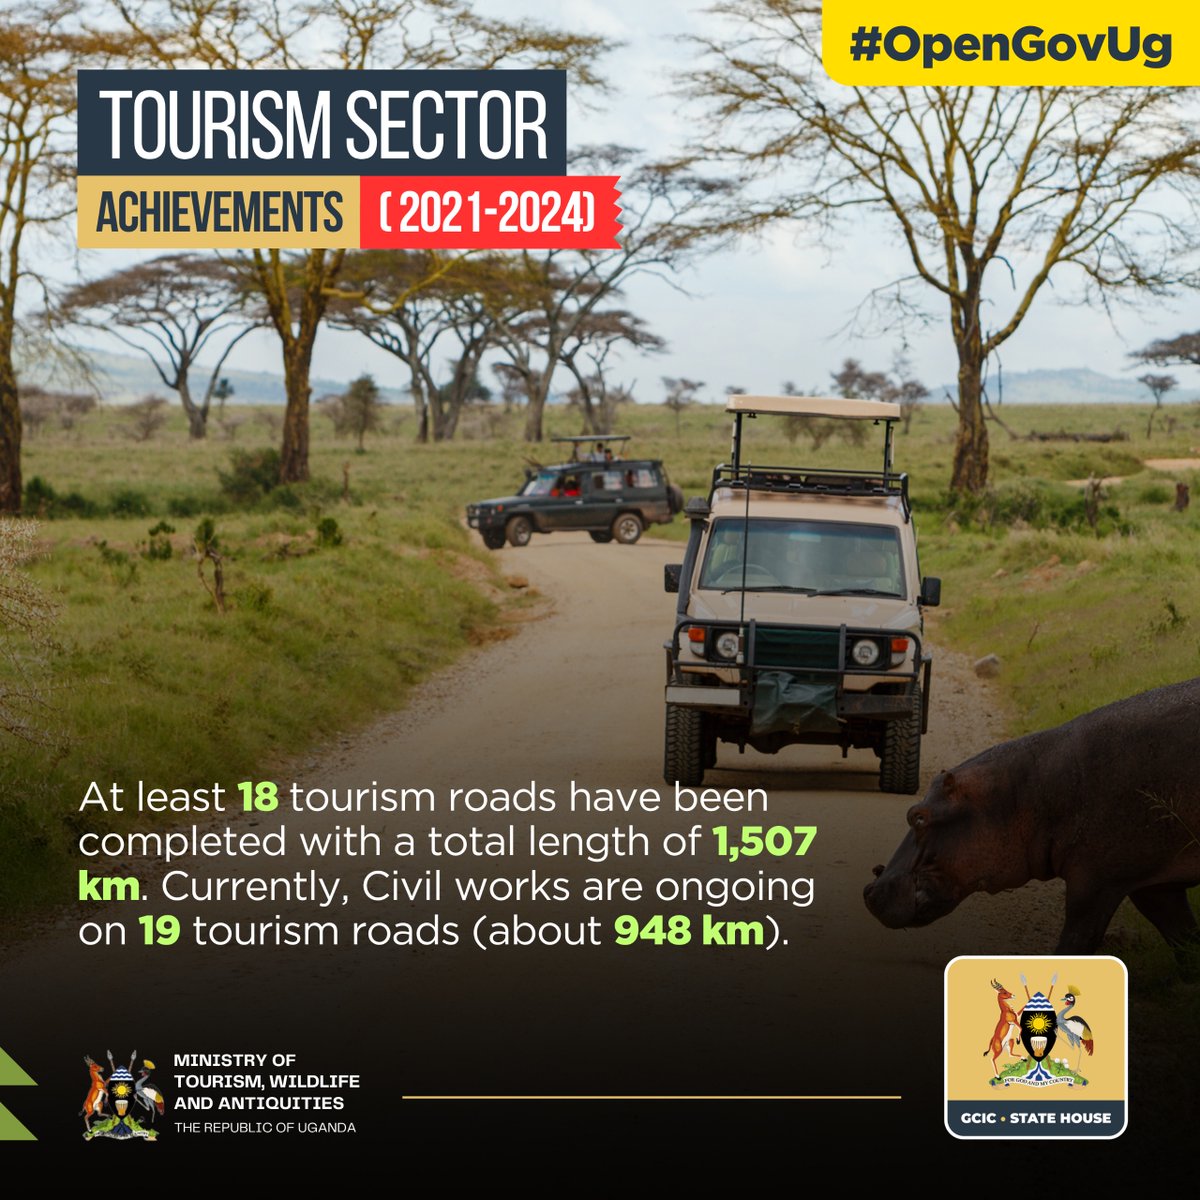 𝐆𝐨𝐨𝐝 𝐦𝐨𝐫𝐧𝐢𝐧𝐠 𝐔𝐠𝐚𝐧𝐝𝐚 Did you explore some domestic tourism over the weekend? I hope you noticed how nice our tourism roads are. Excitingly, an additional 19 tourism roads, spanning approximately 948 kilometers, are set to be constructed soon. #OpenGovUg